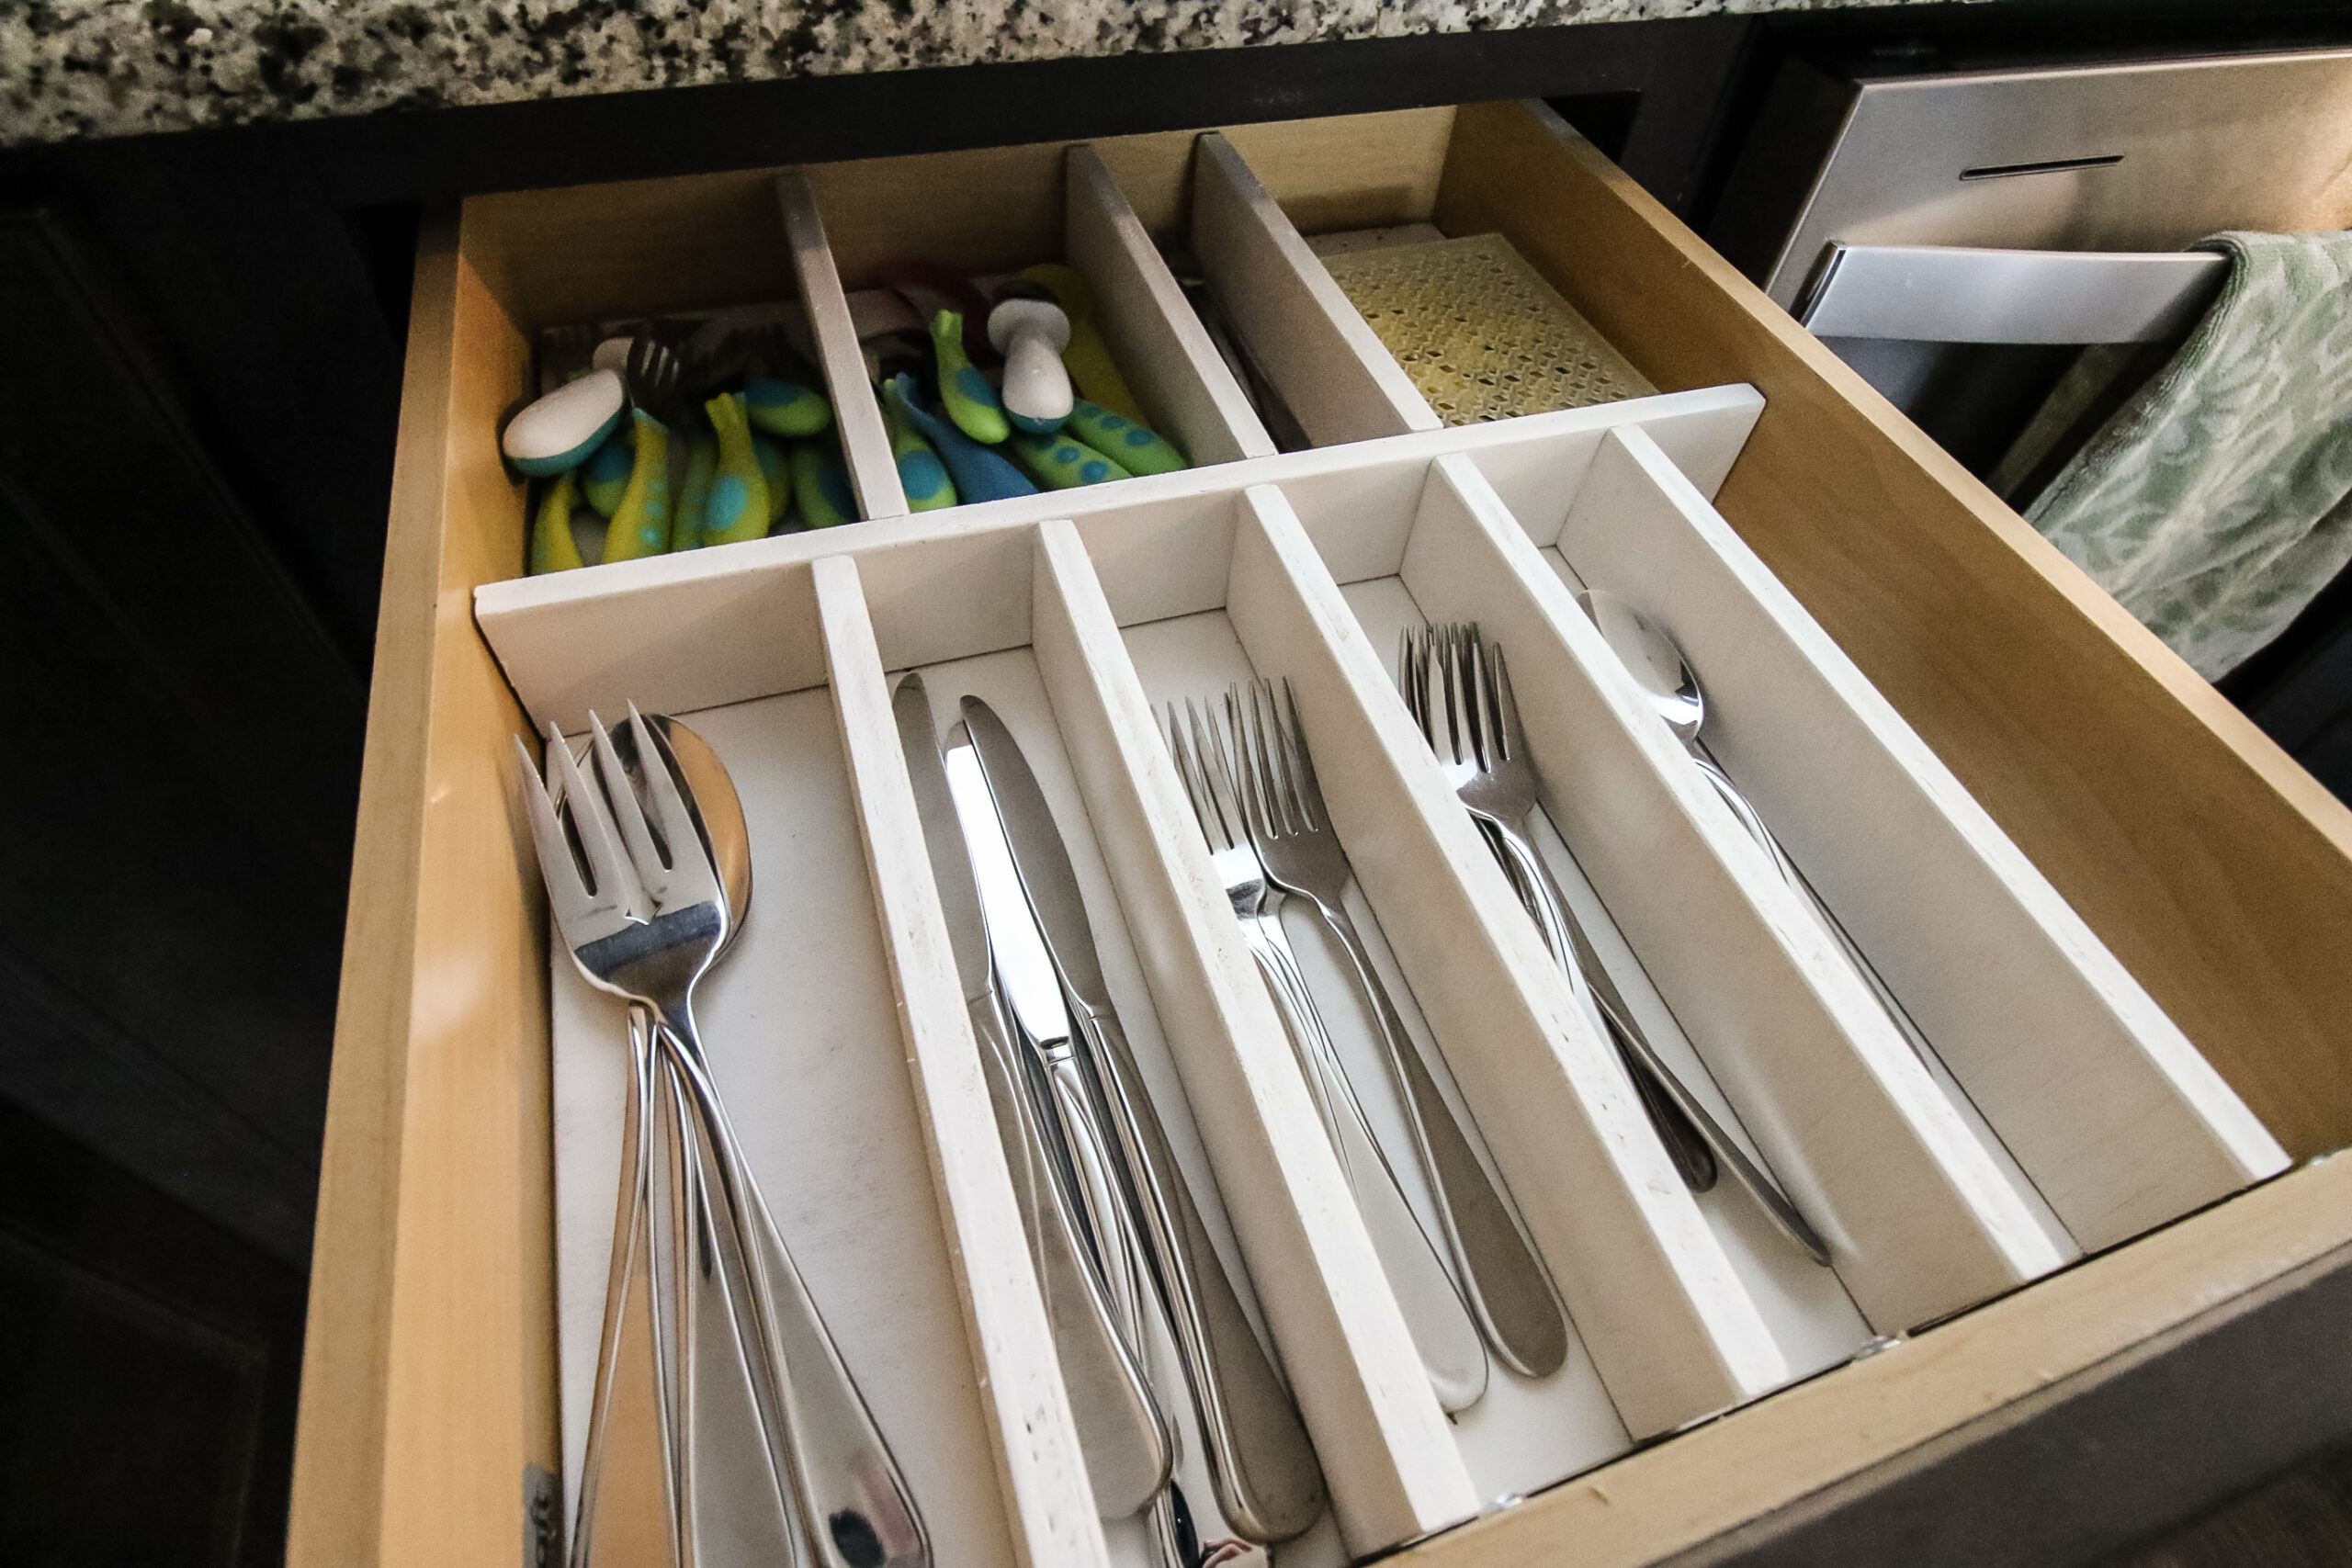 How to make DIY kitchen drawer dividers